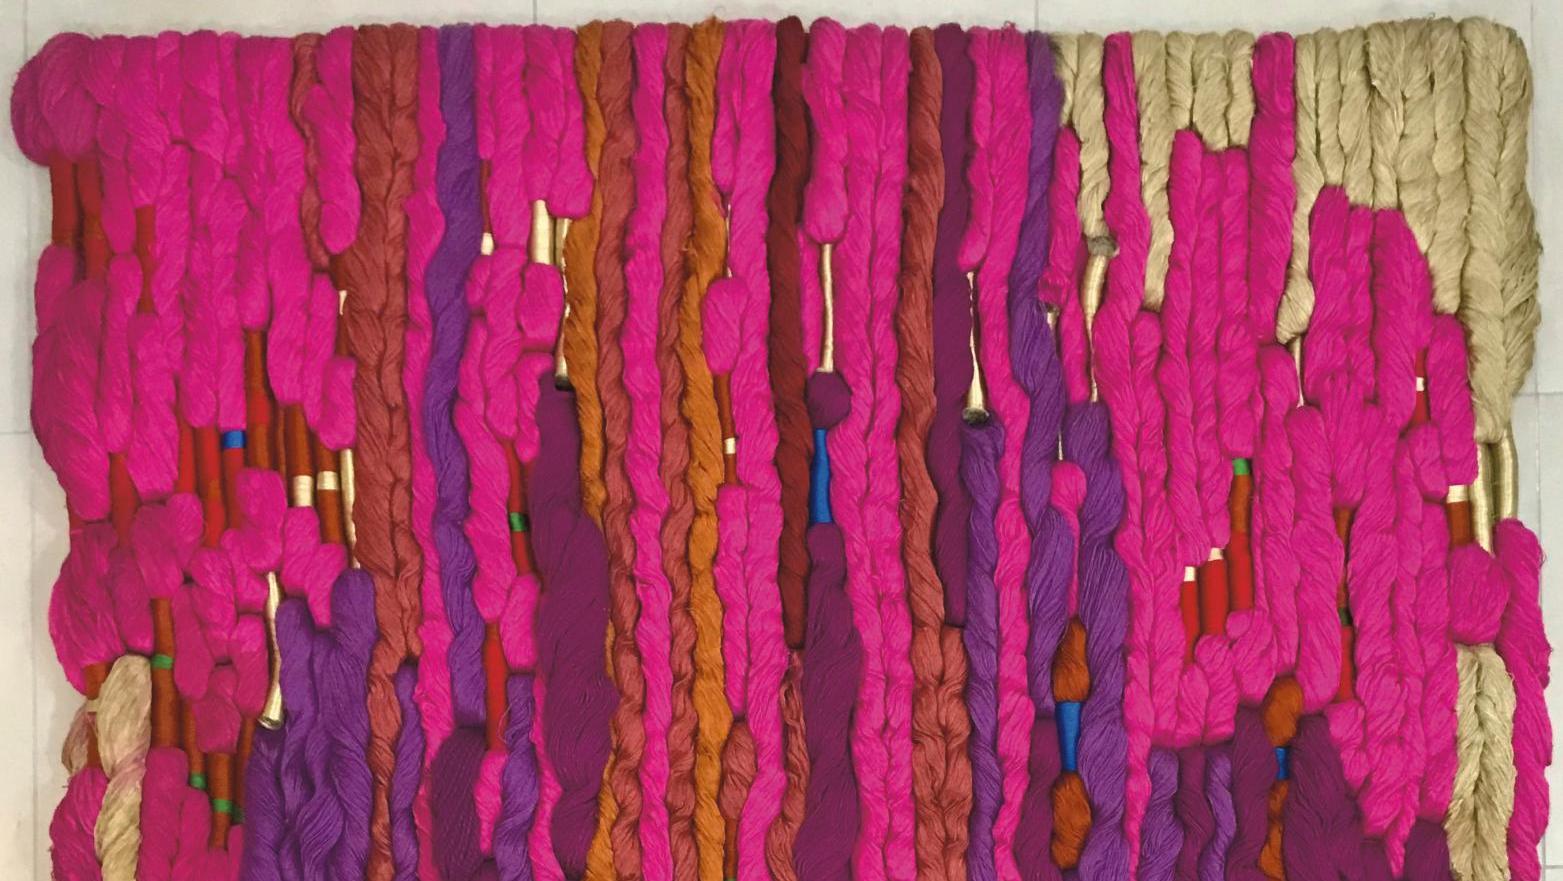 Sheila Hicks (born 1934), Untitled, 1981, tapestry, mixed media, signed and dated... From Sheila Hicks to Fernando Botero